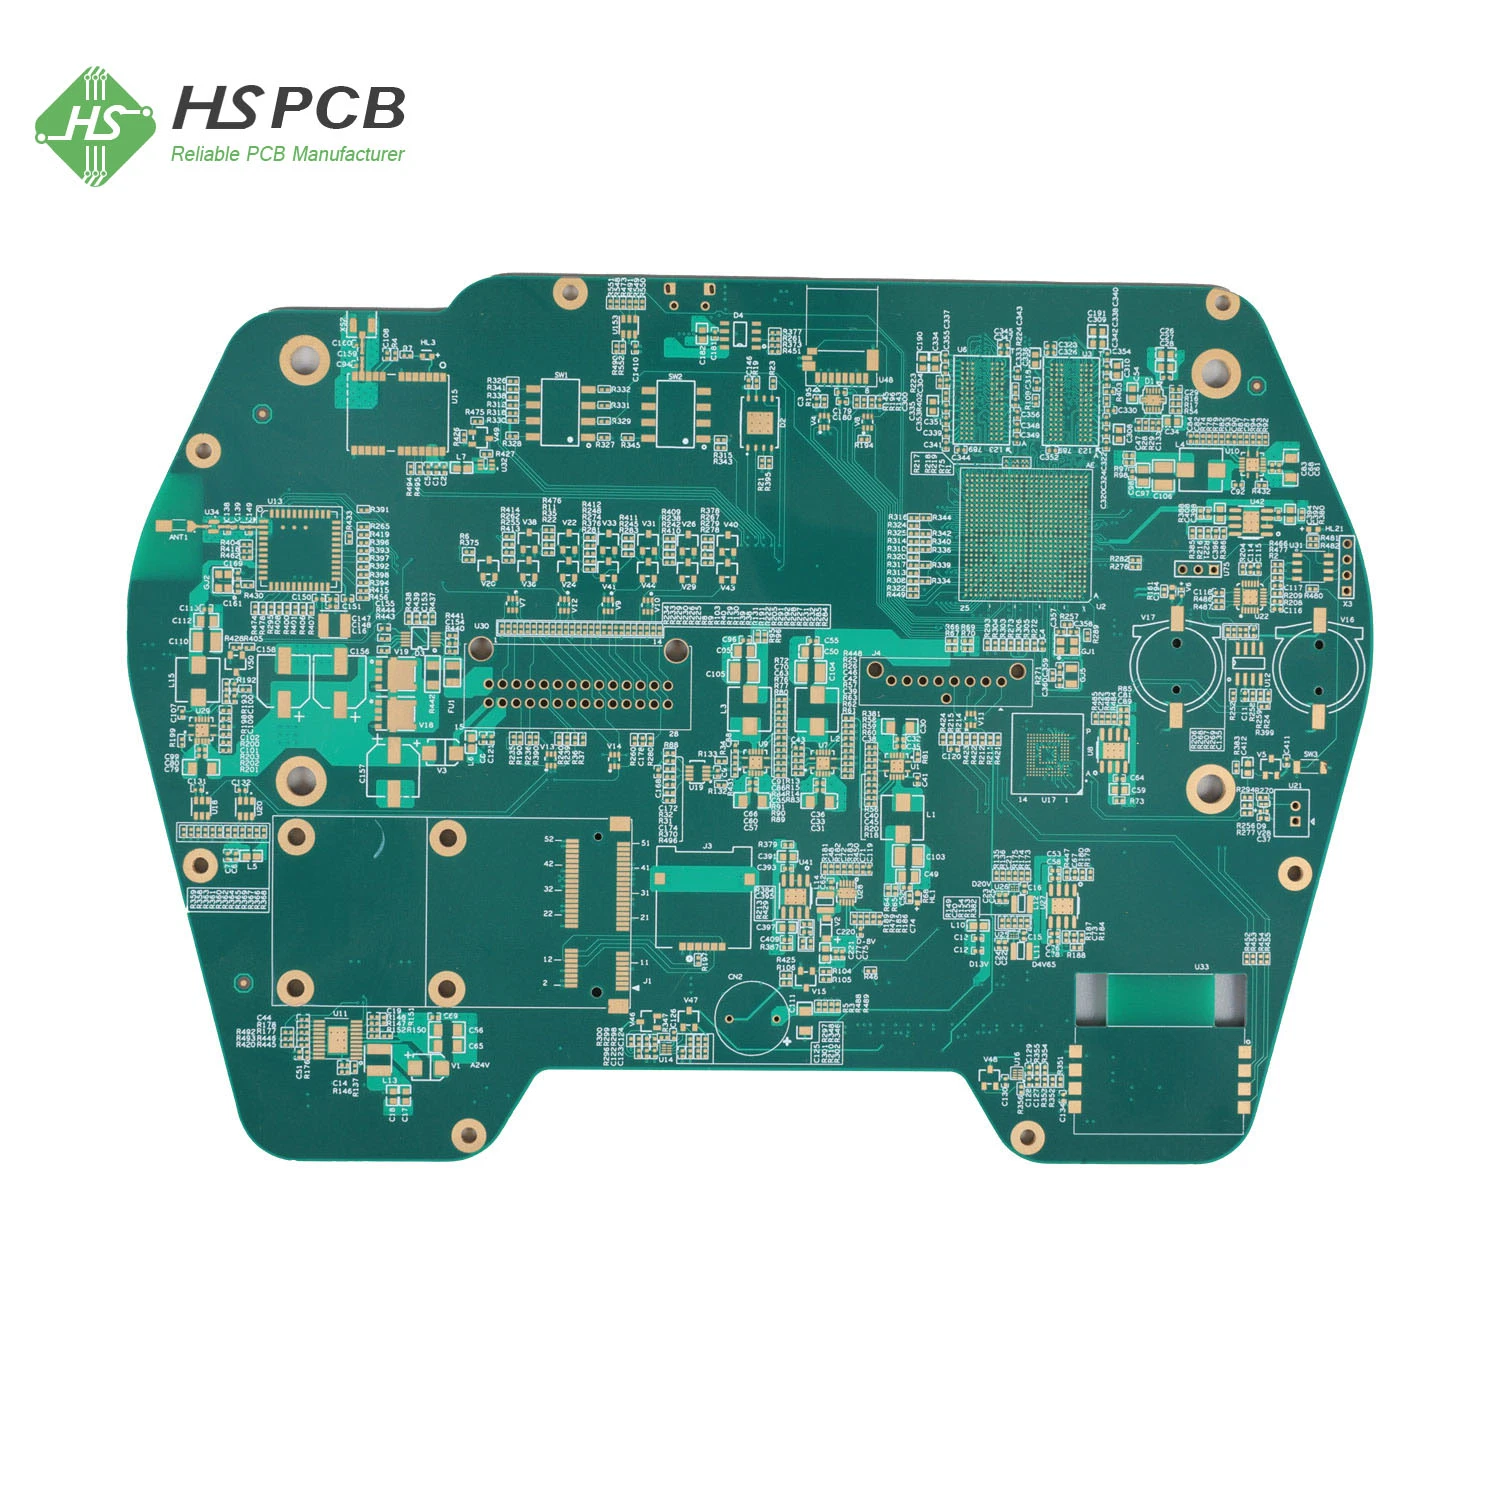 Express/Expedited Services Urgent Sample Customized Mutilayer PCB Board Manufacturer